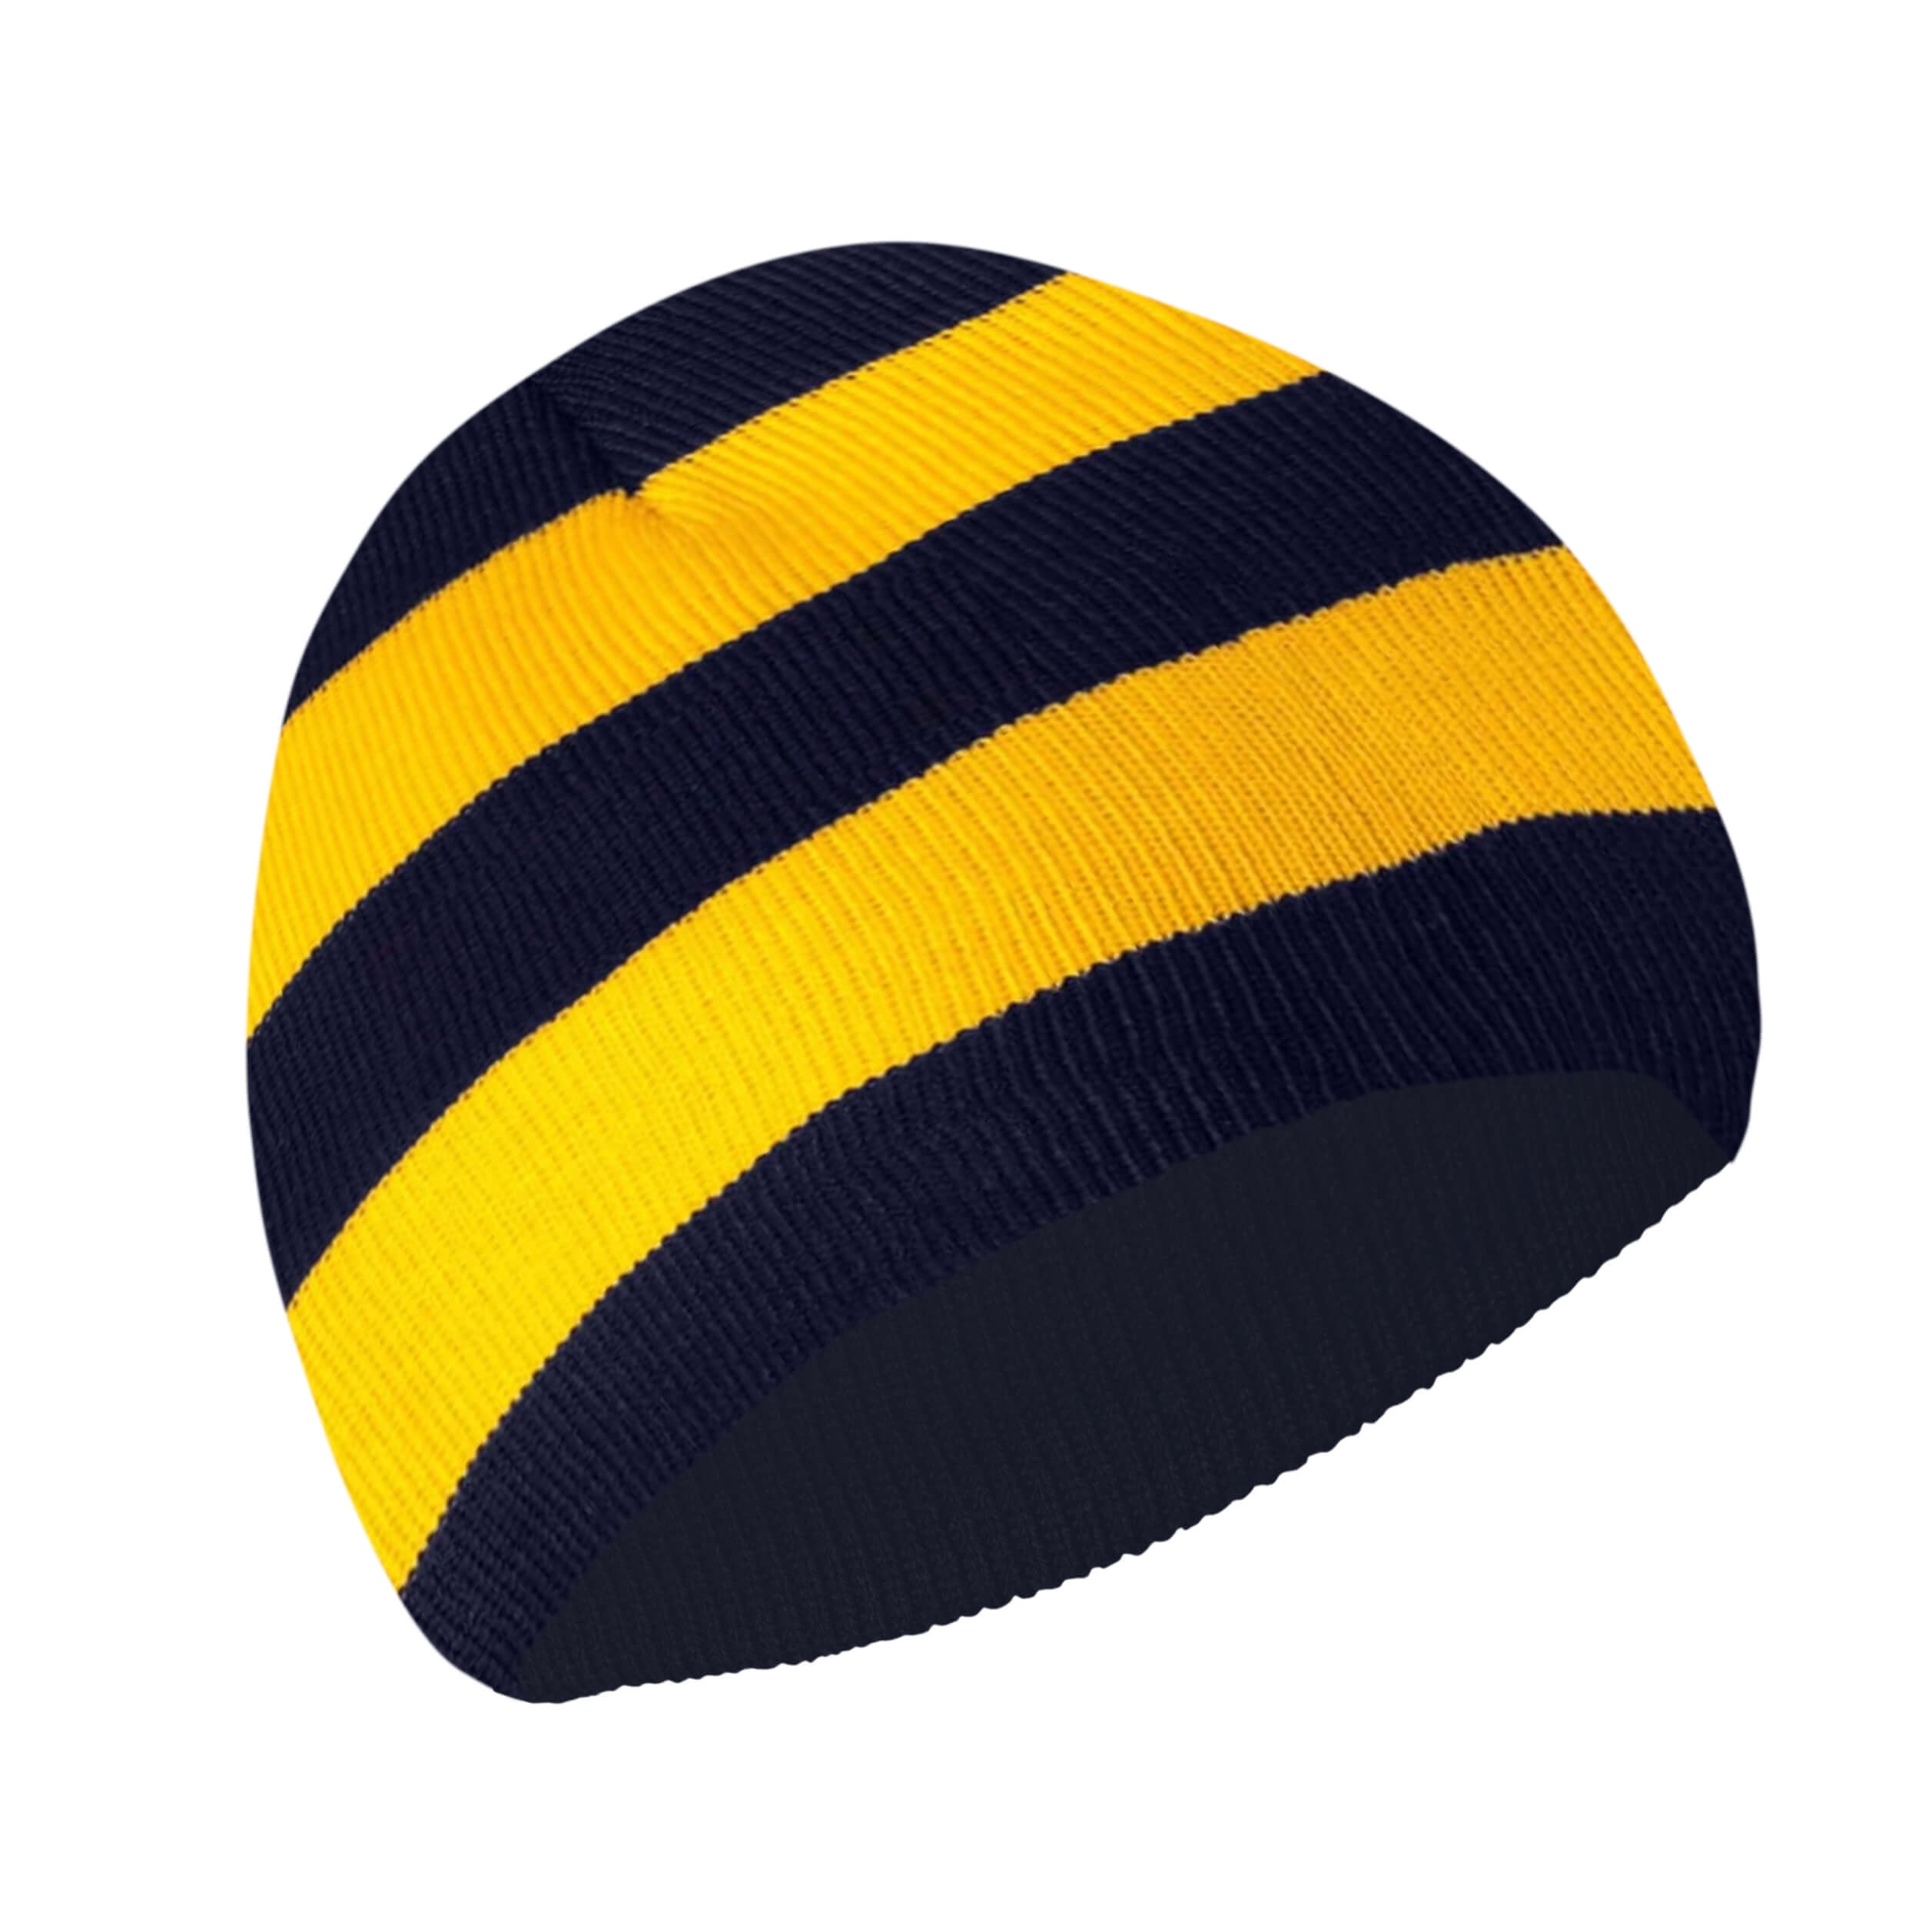 Knit Winter Rugby Striped Beanie Hats for Men & Women - Stay Warm & Stylish (Navy/ Gold)